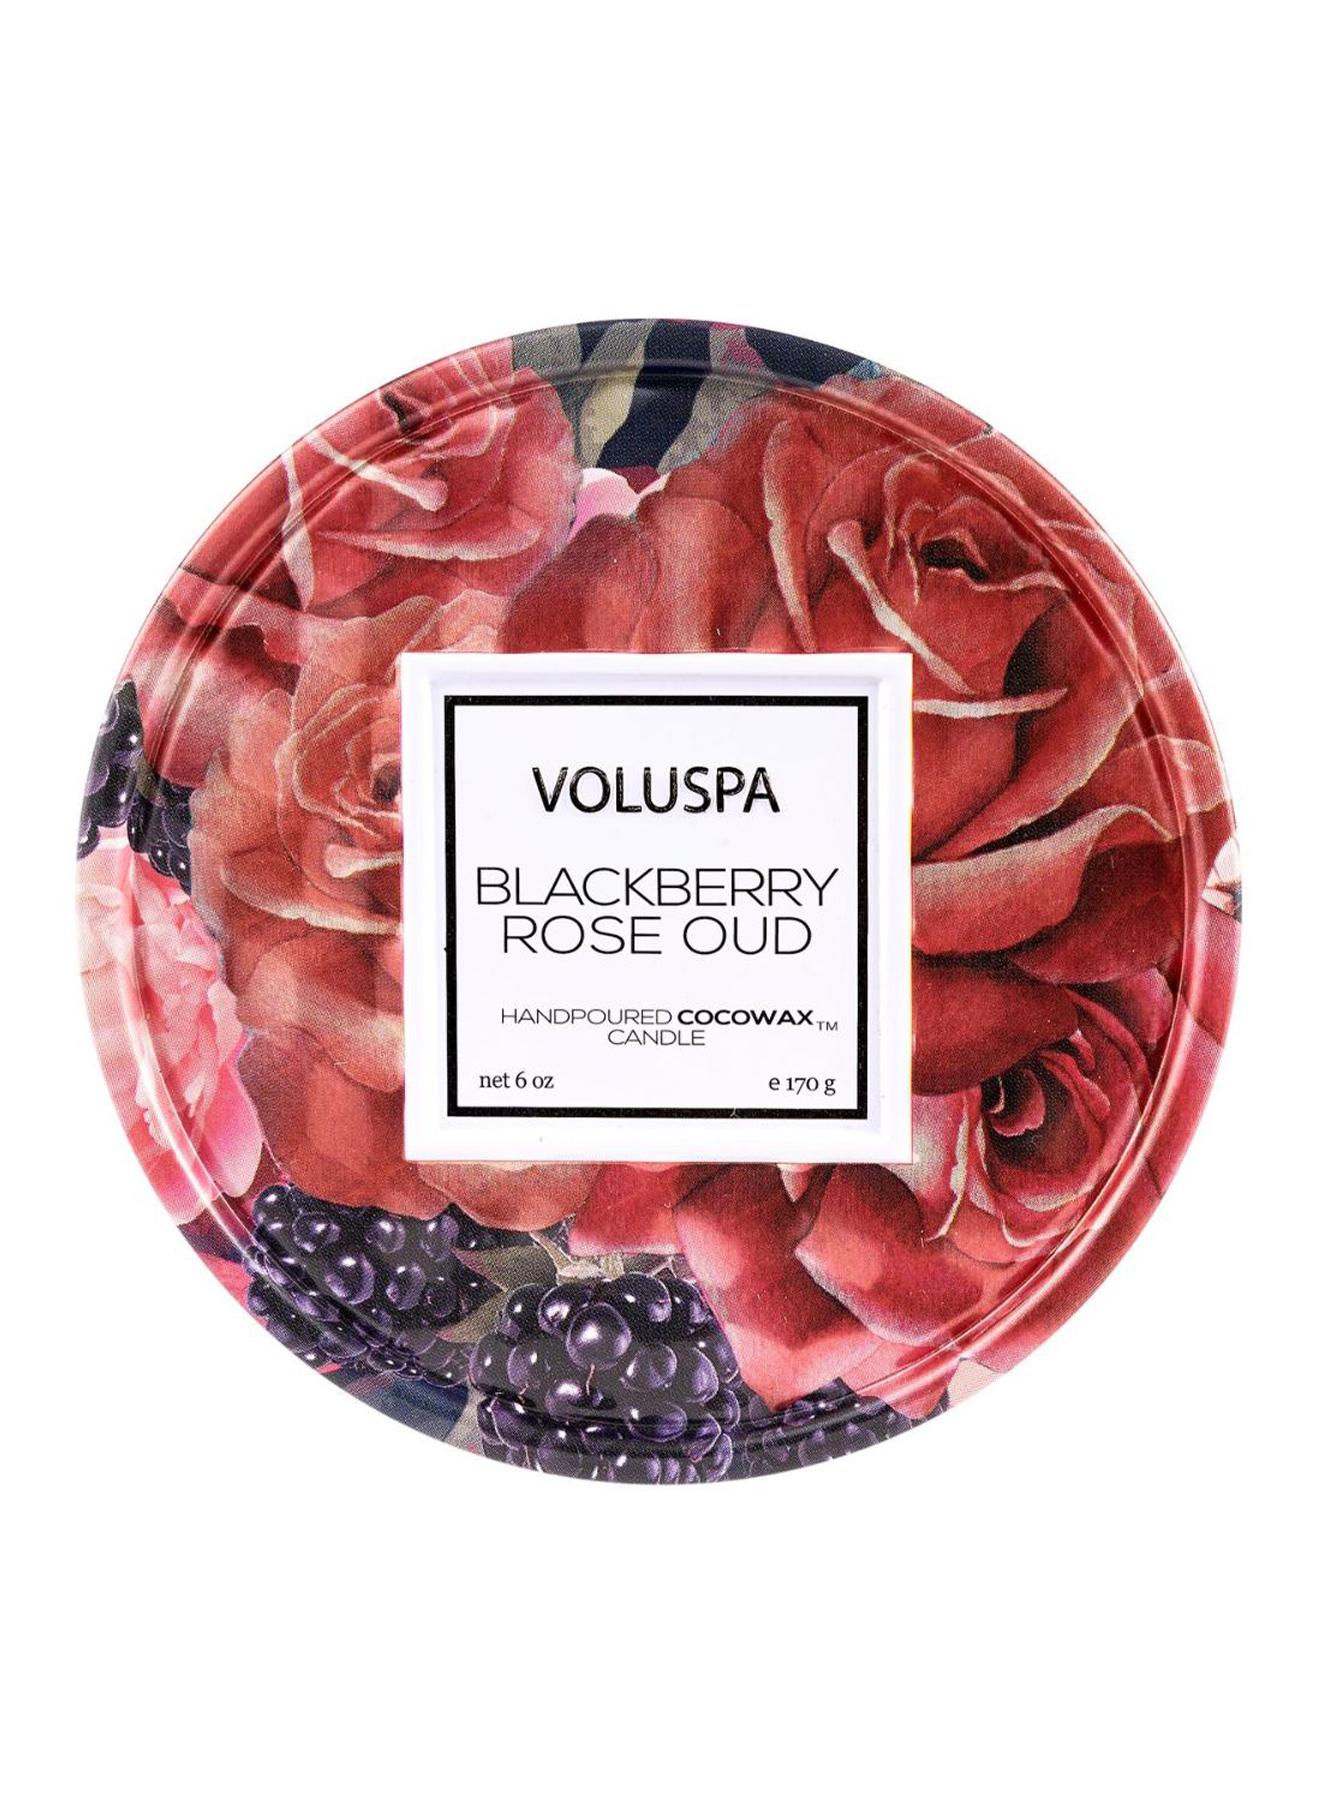 Blackberry rose oud 2 wick tin candle - 2